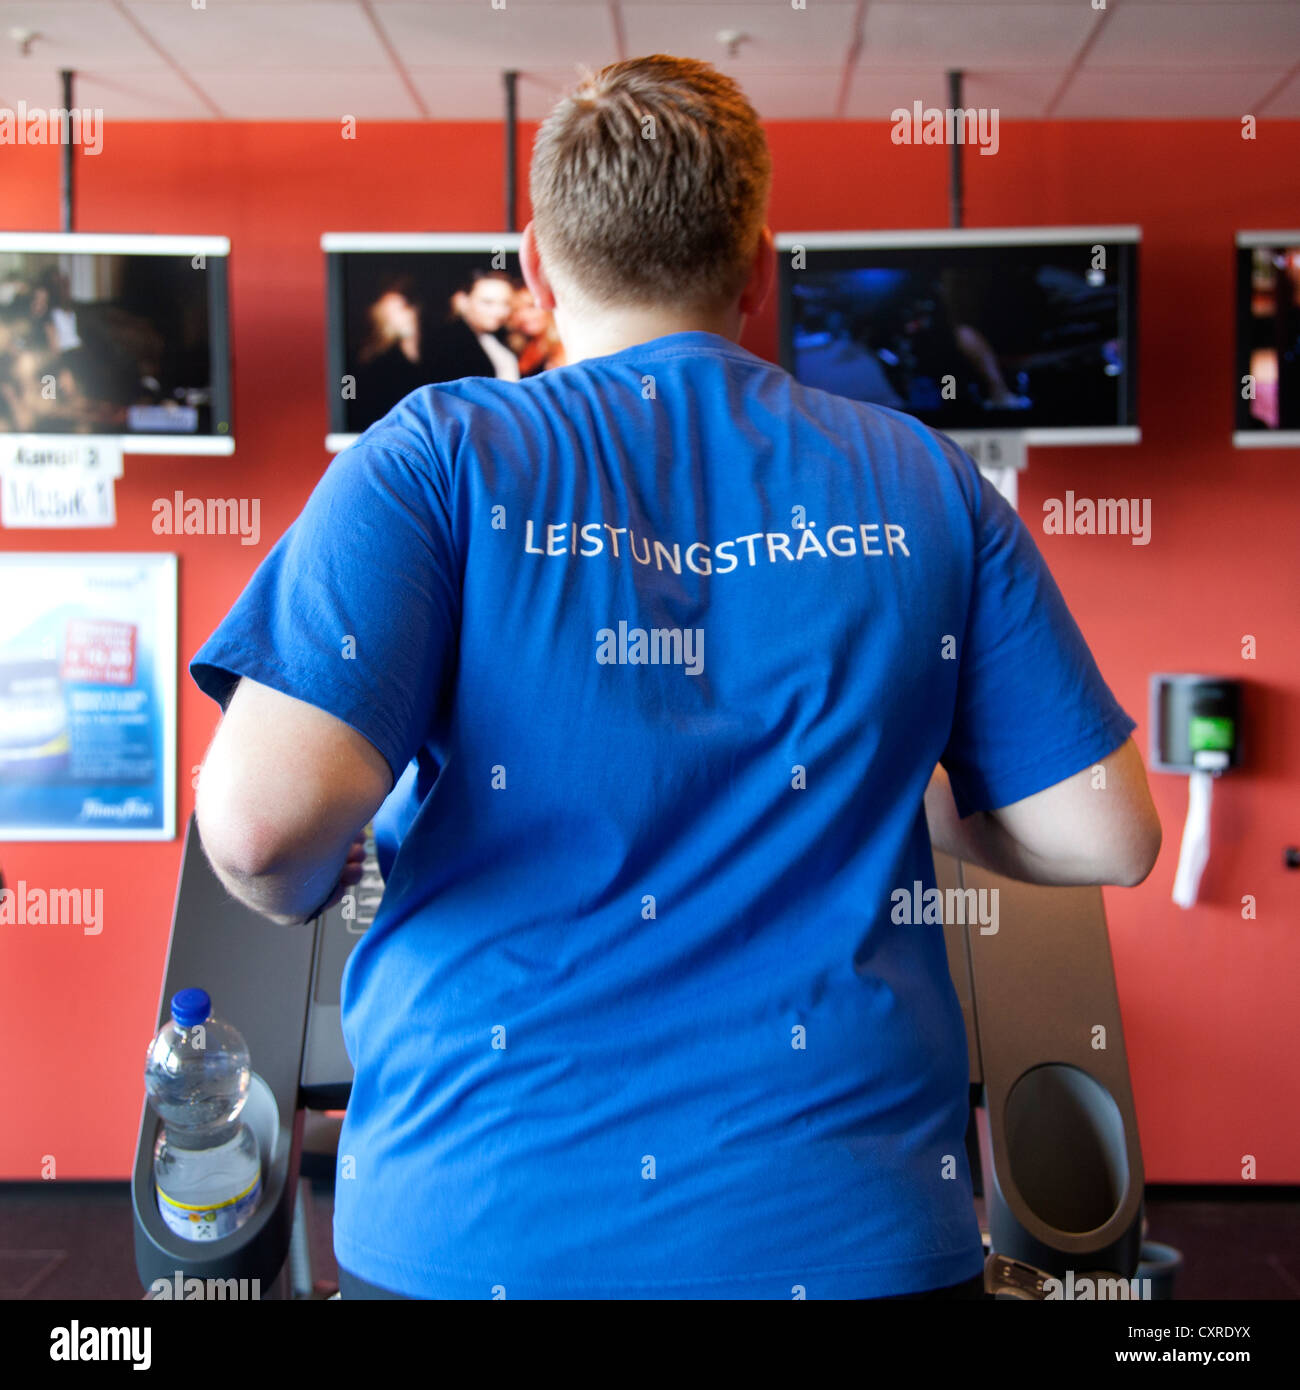 Athlete wearing a t-shirt, lettering 'Leistungstraeger', German for 'top performer', running on a treadmill, fitness centre Stock Photo